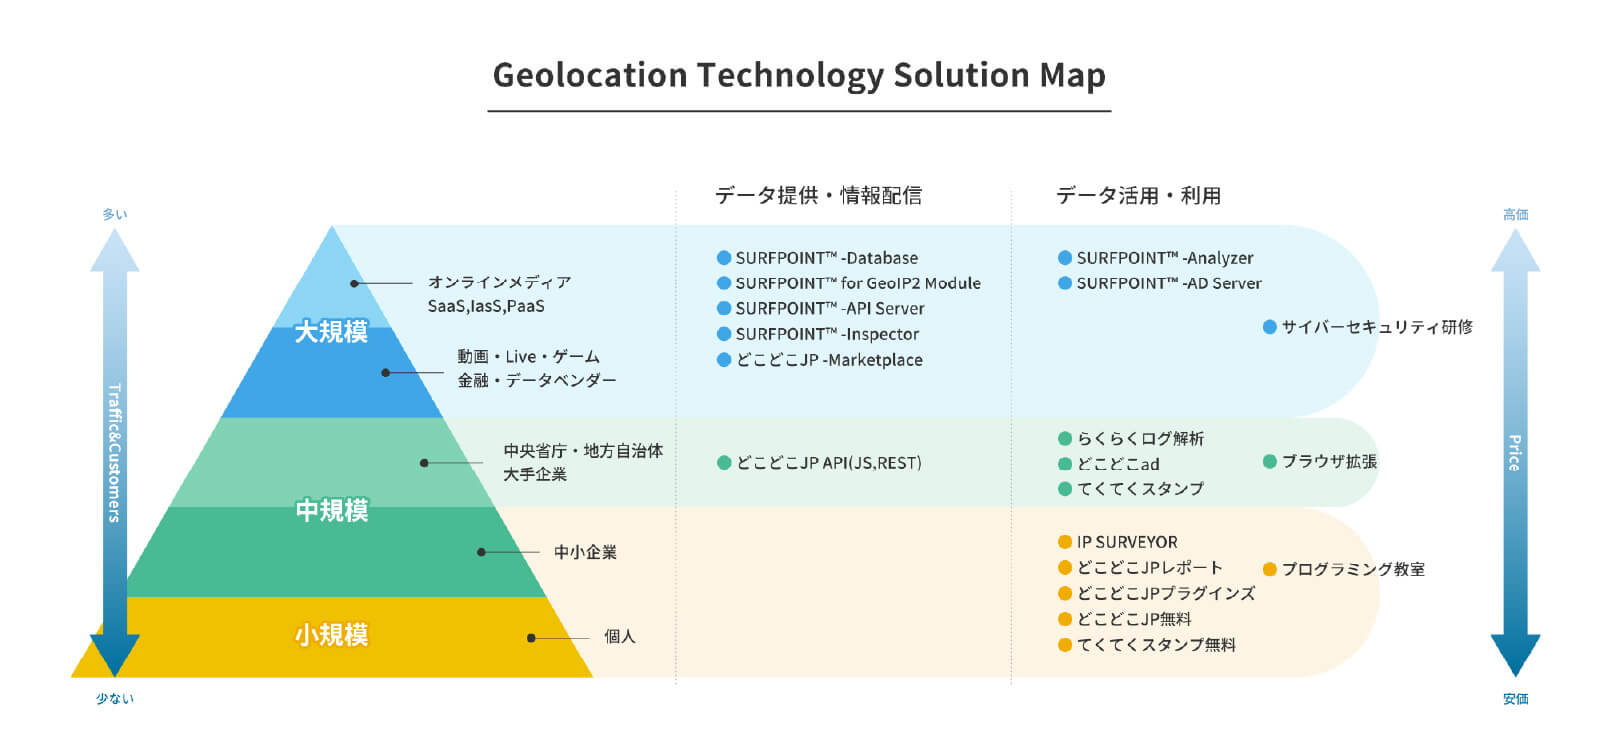 Geolocation Technology Solution Map